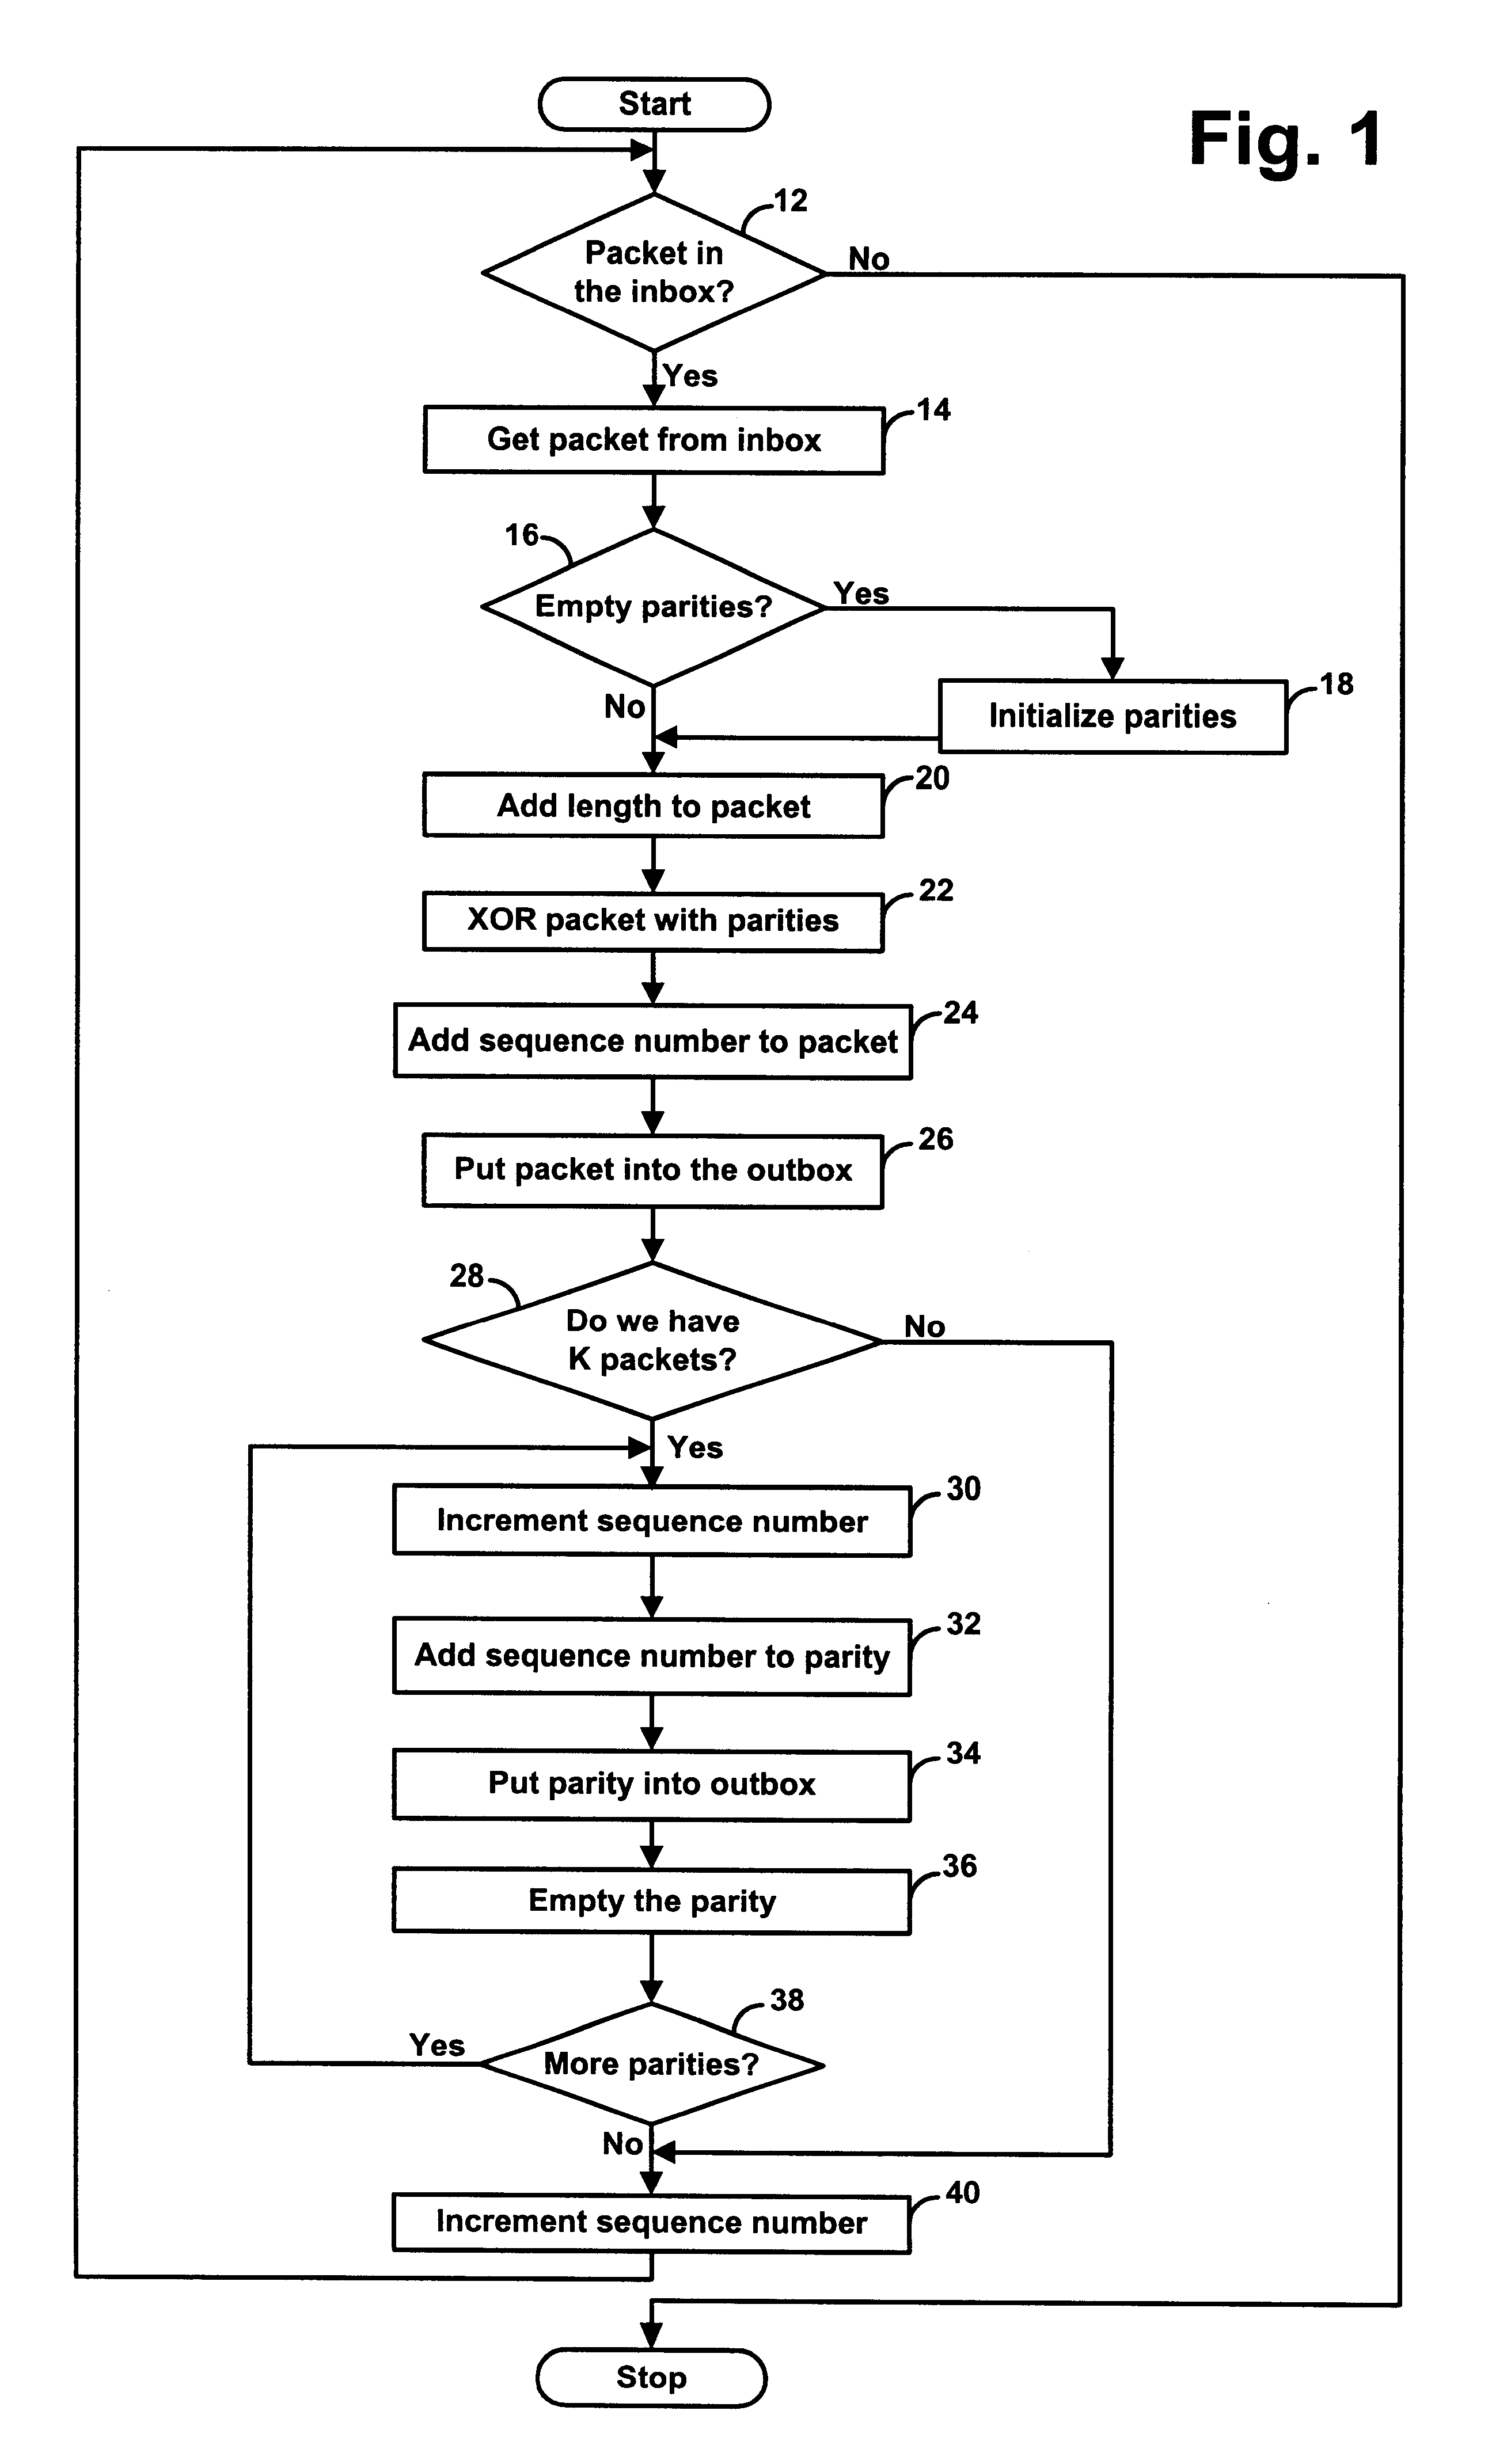 Forward error correction system for packet based data and real time media, using cross-wise parity calculation